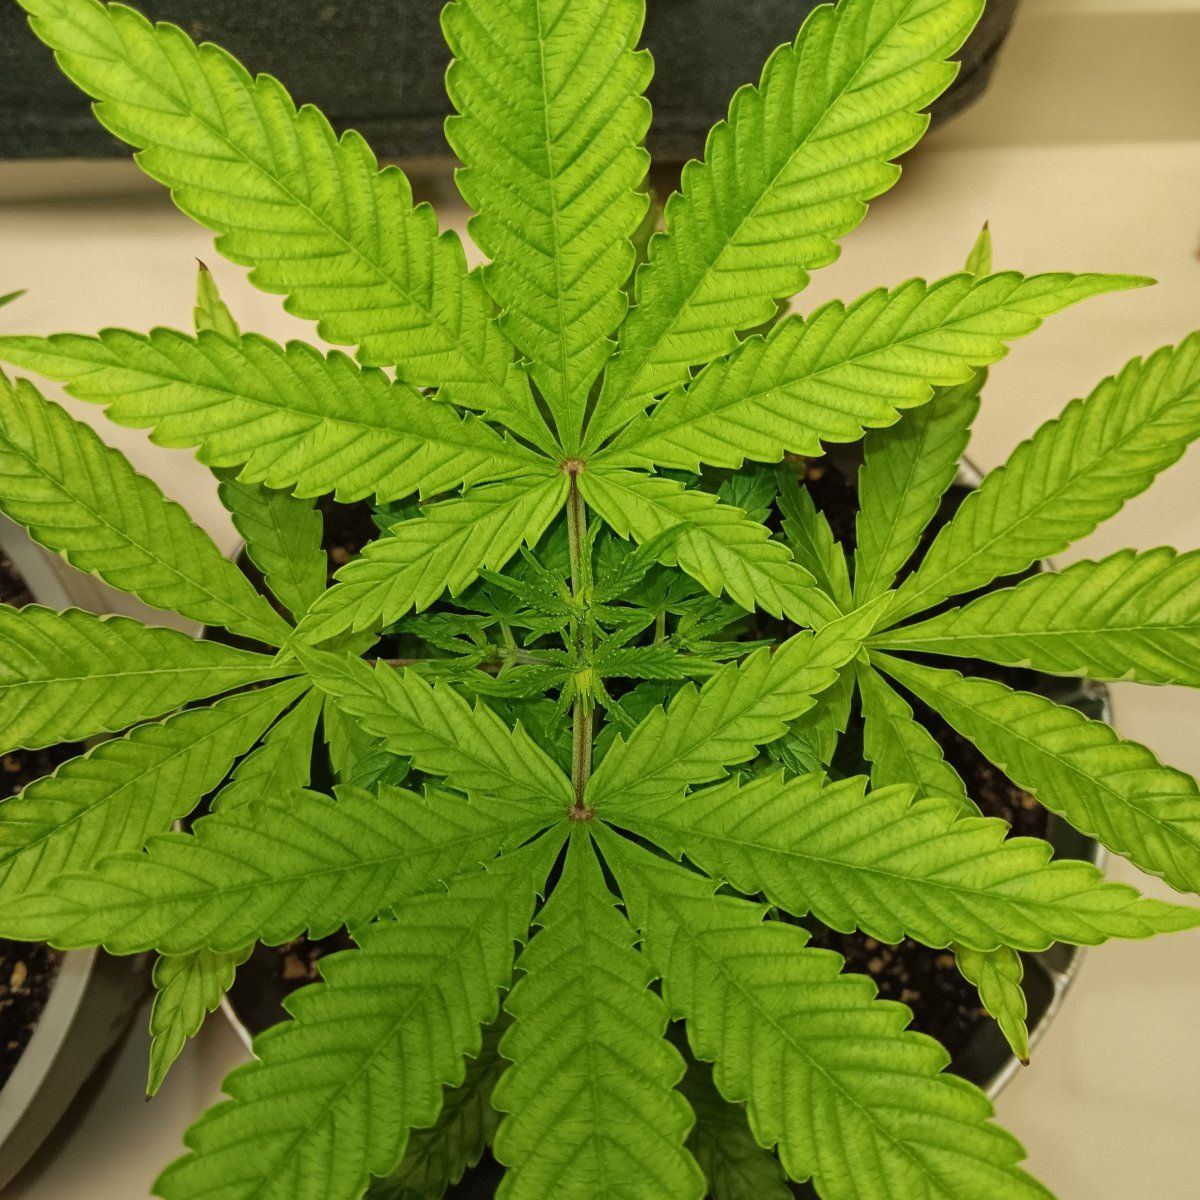 Any help would be appreciated new grower here having a color issue with one plant being too li 6